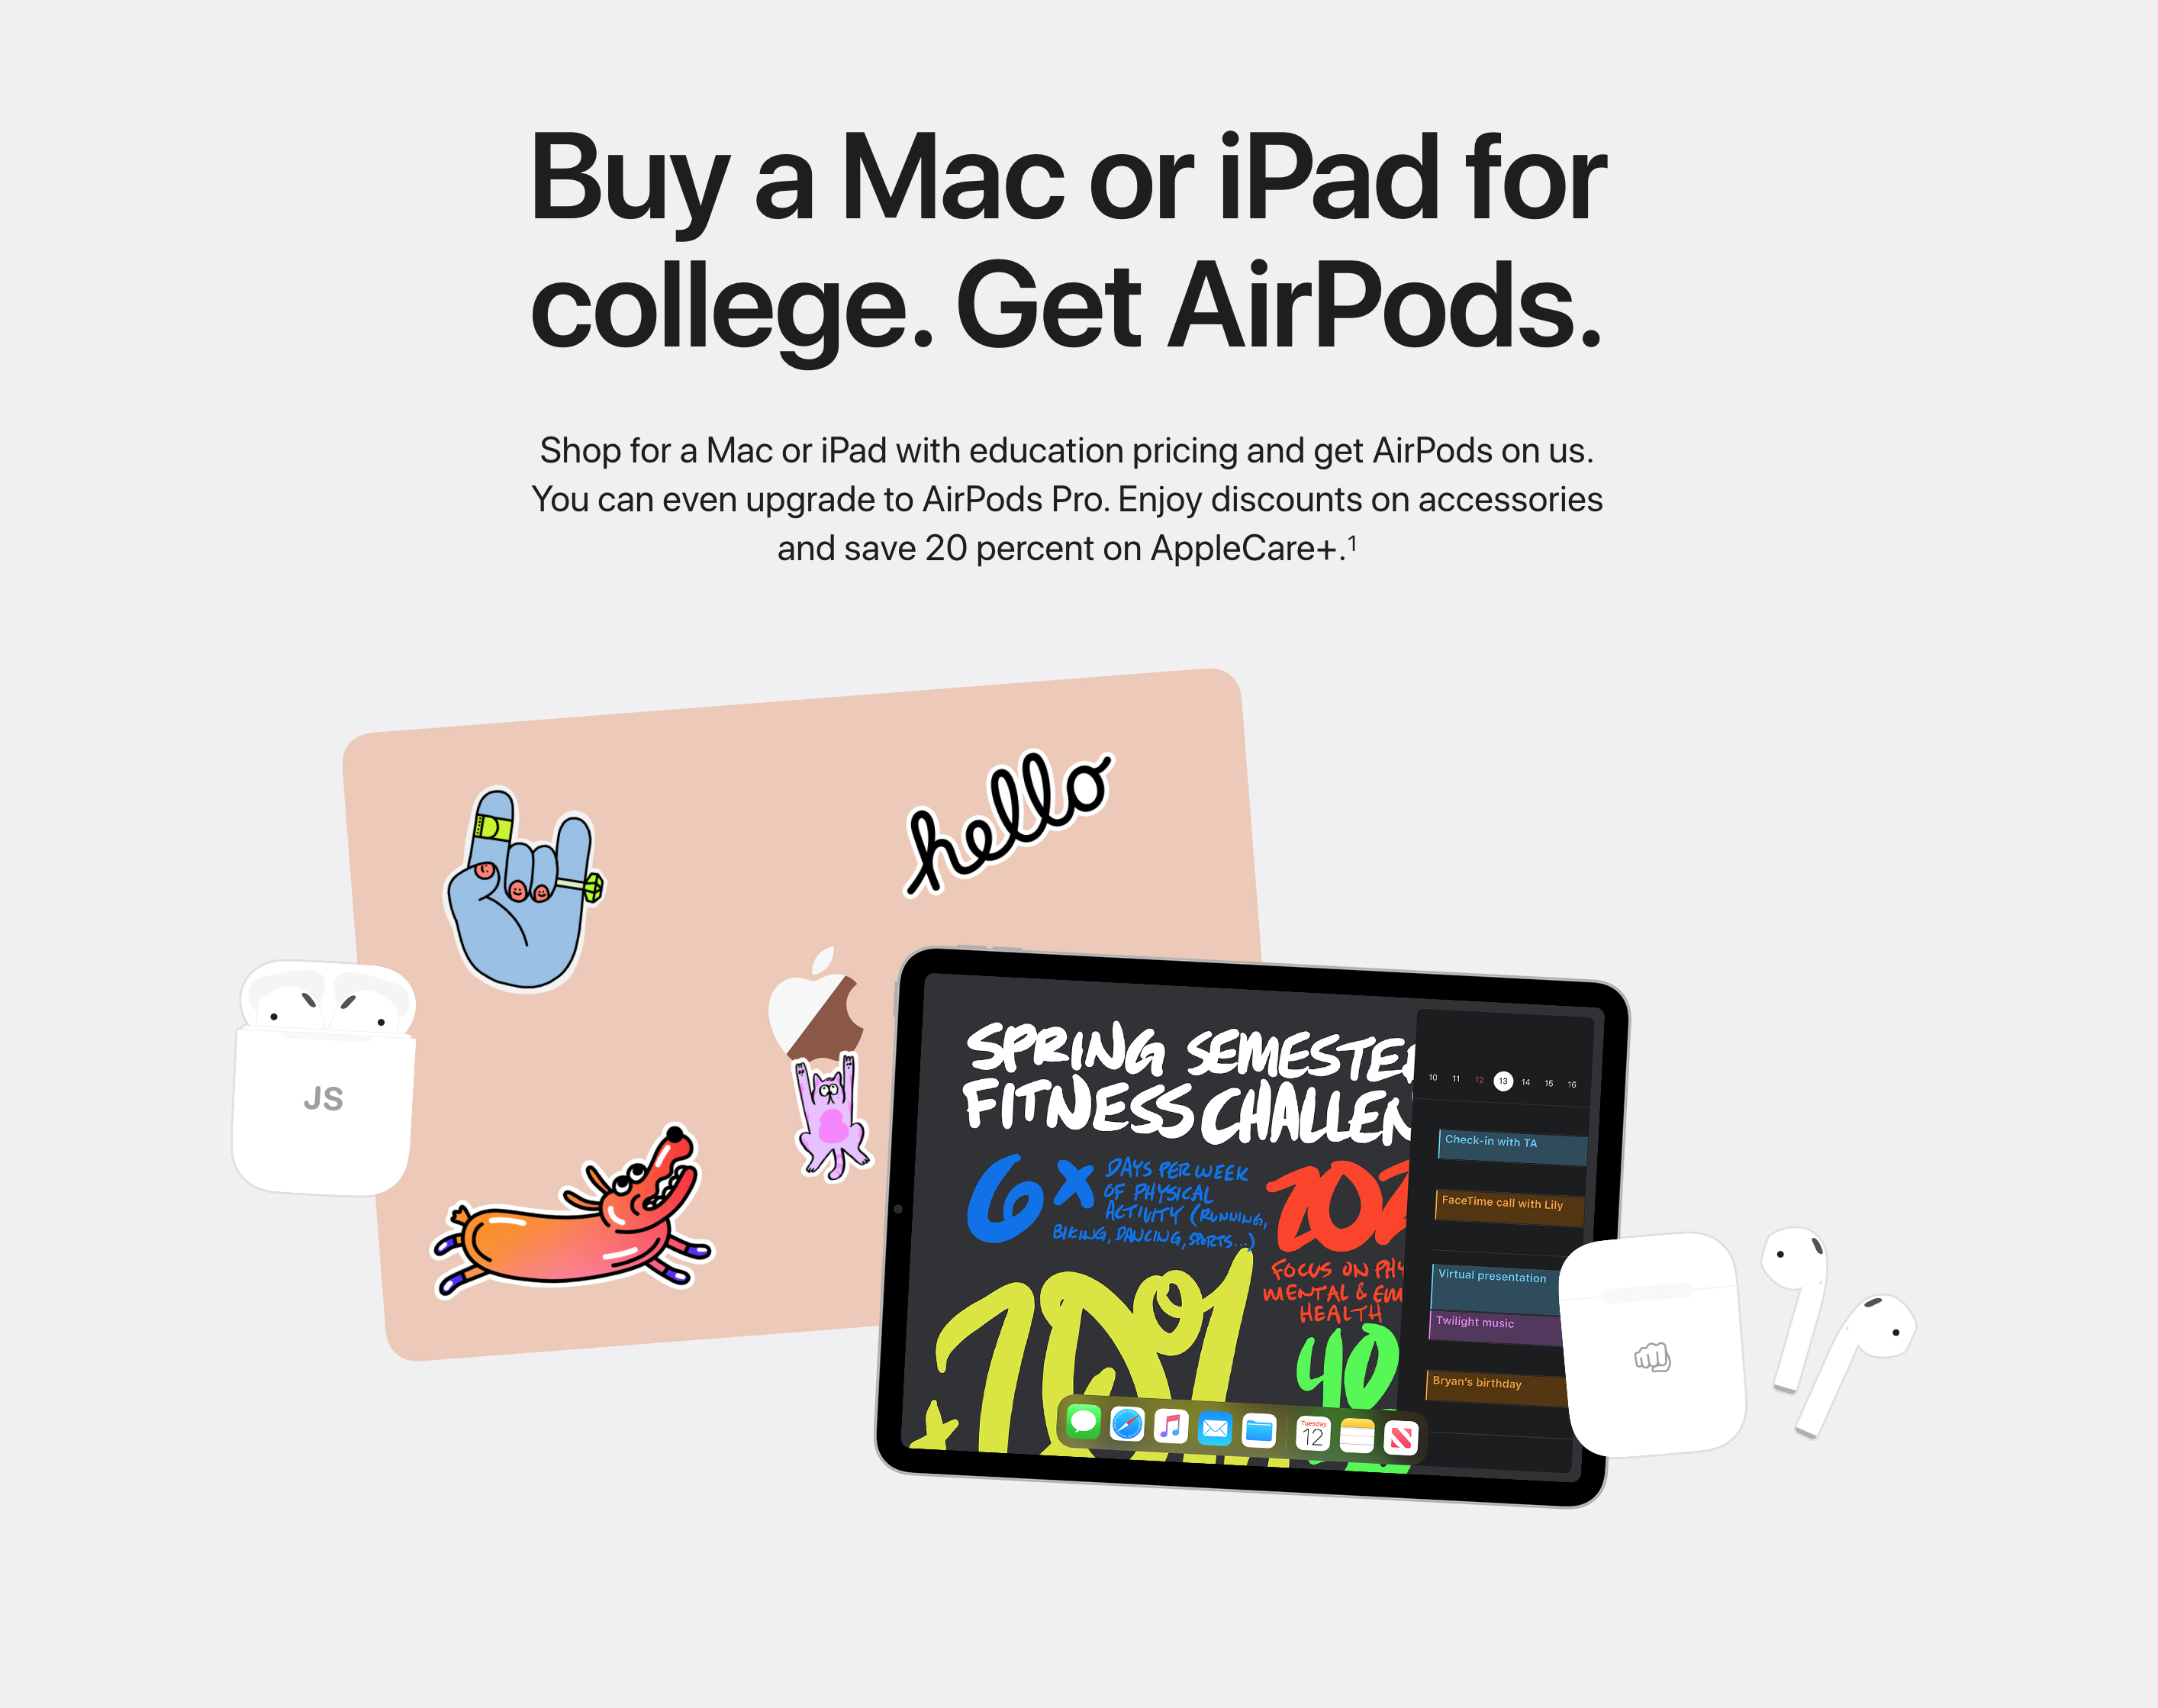 Free AirPods with new Macs and iPads for students